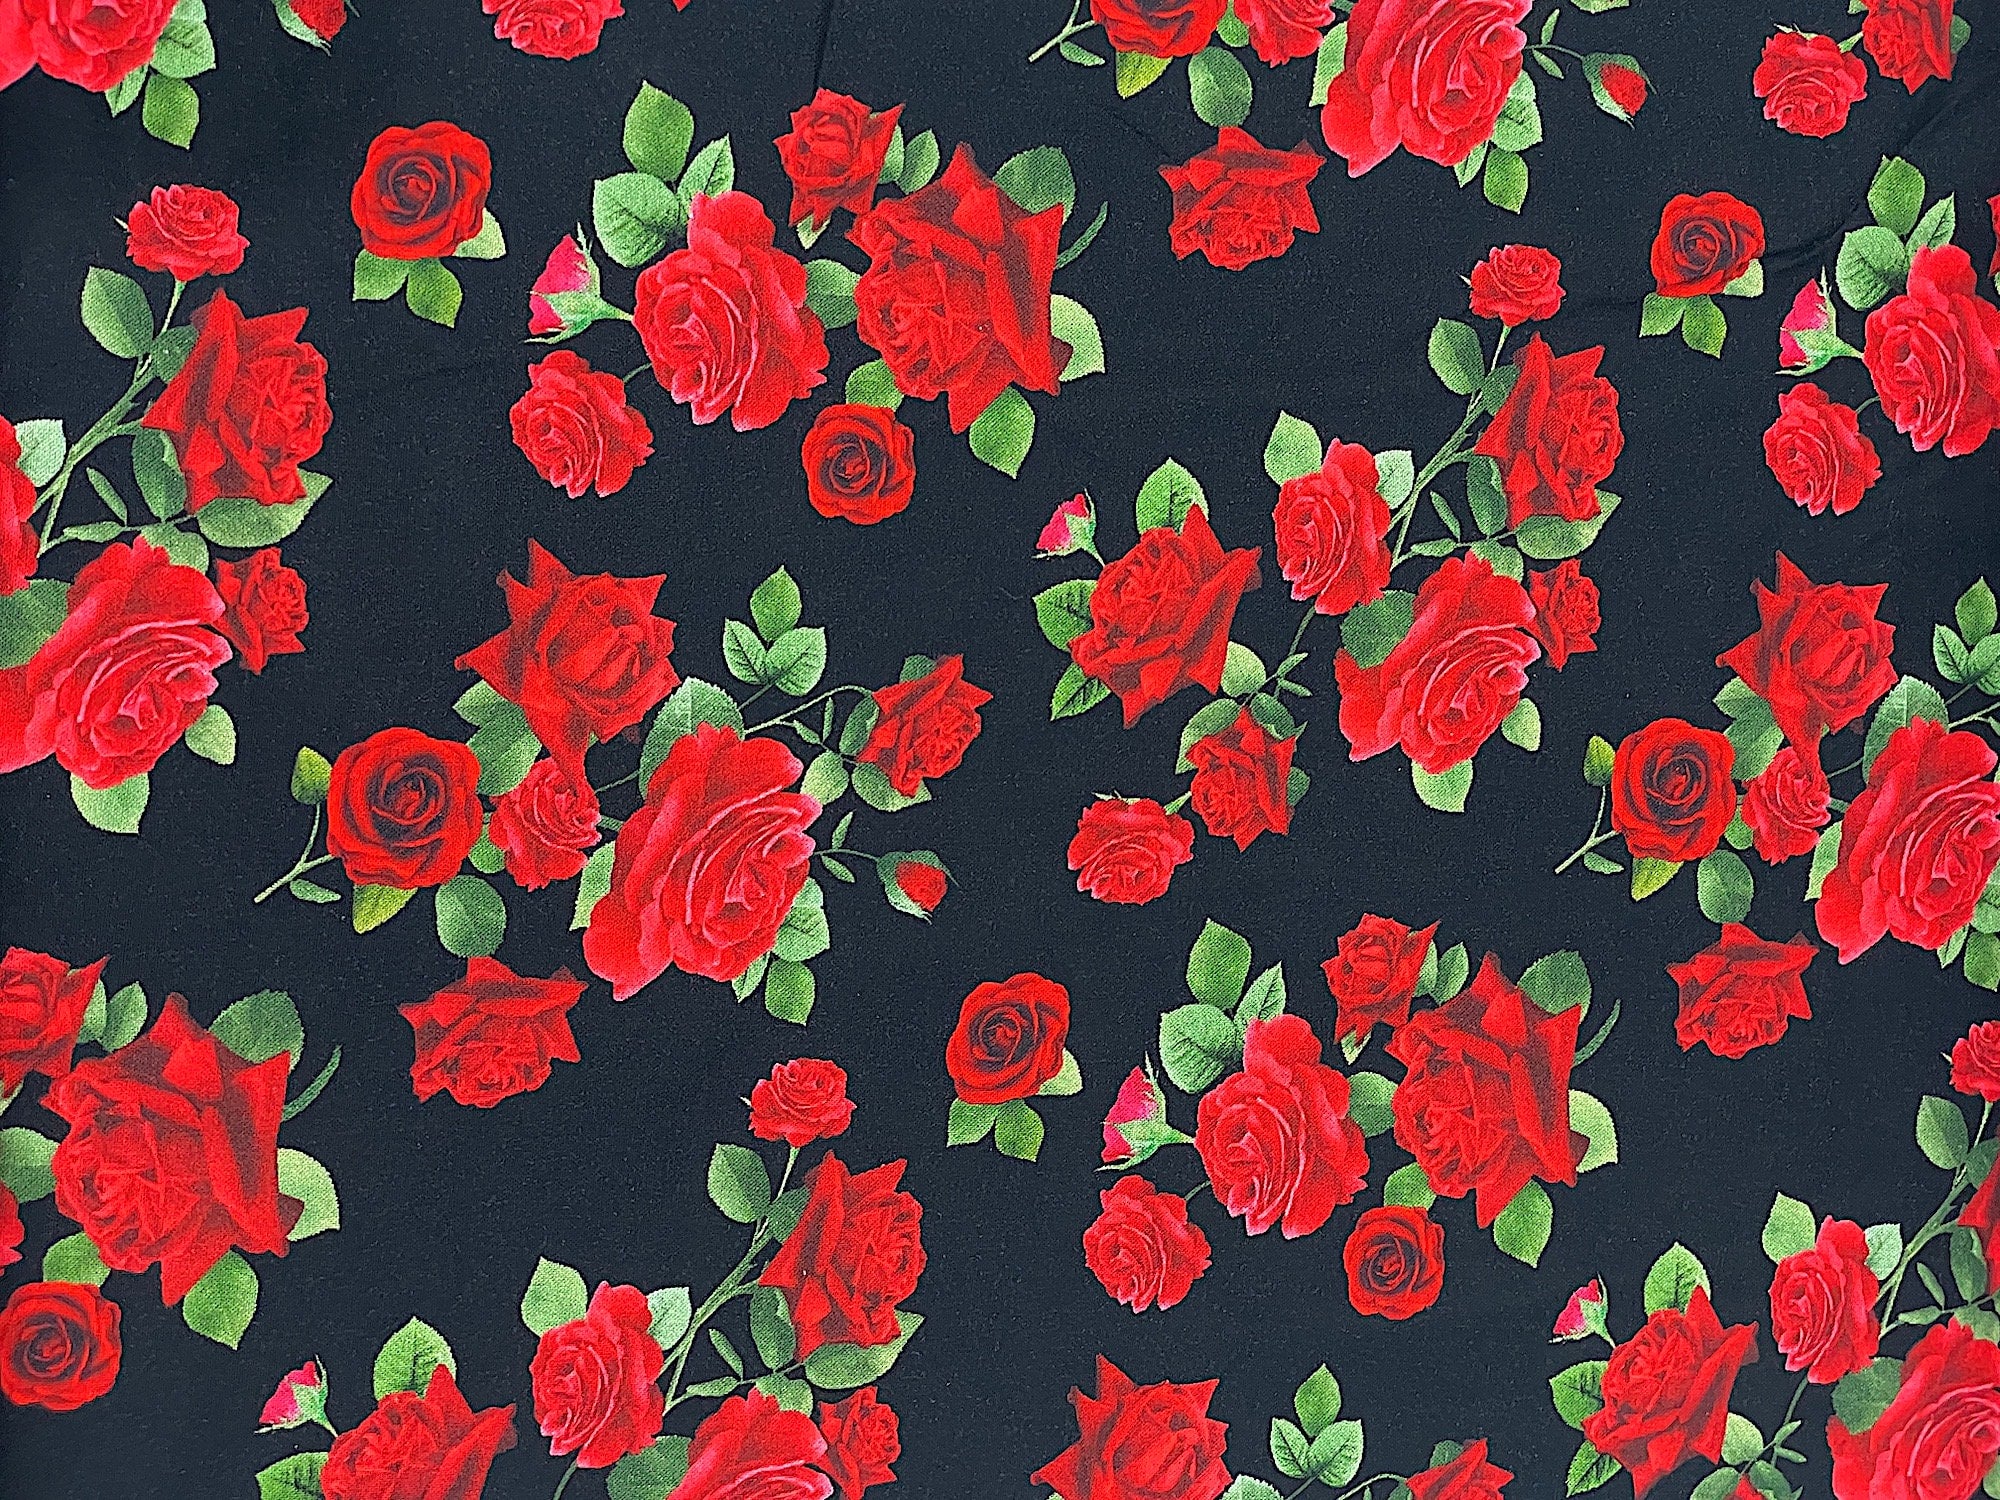 Black cotton fabric covered with red roses and green stems and leaves.